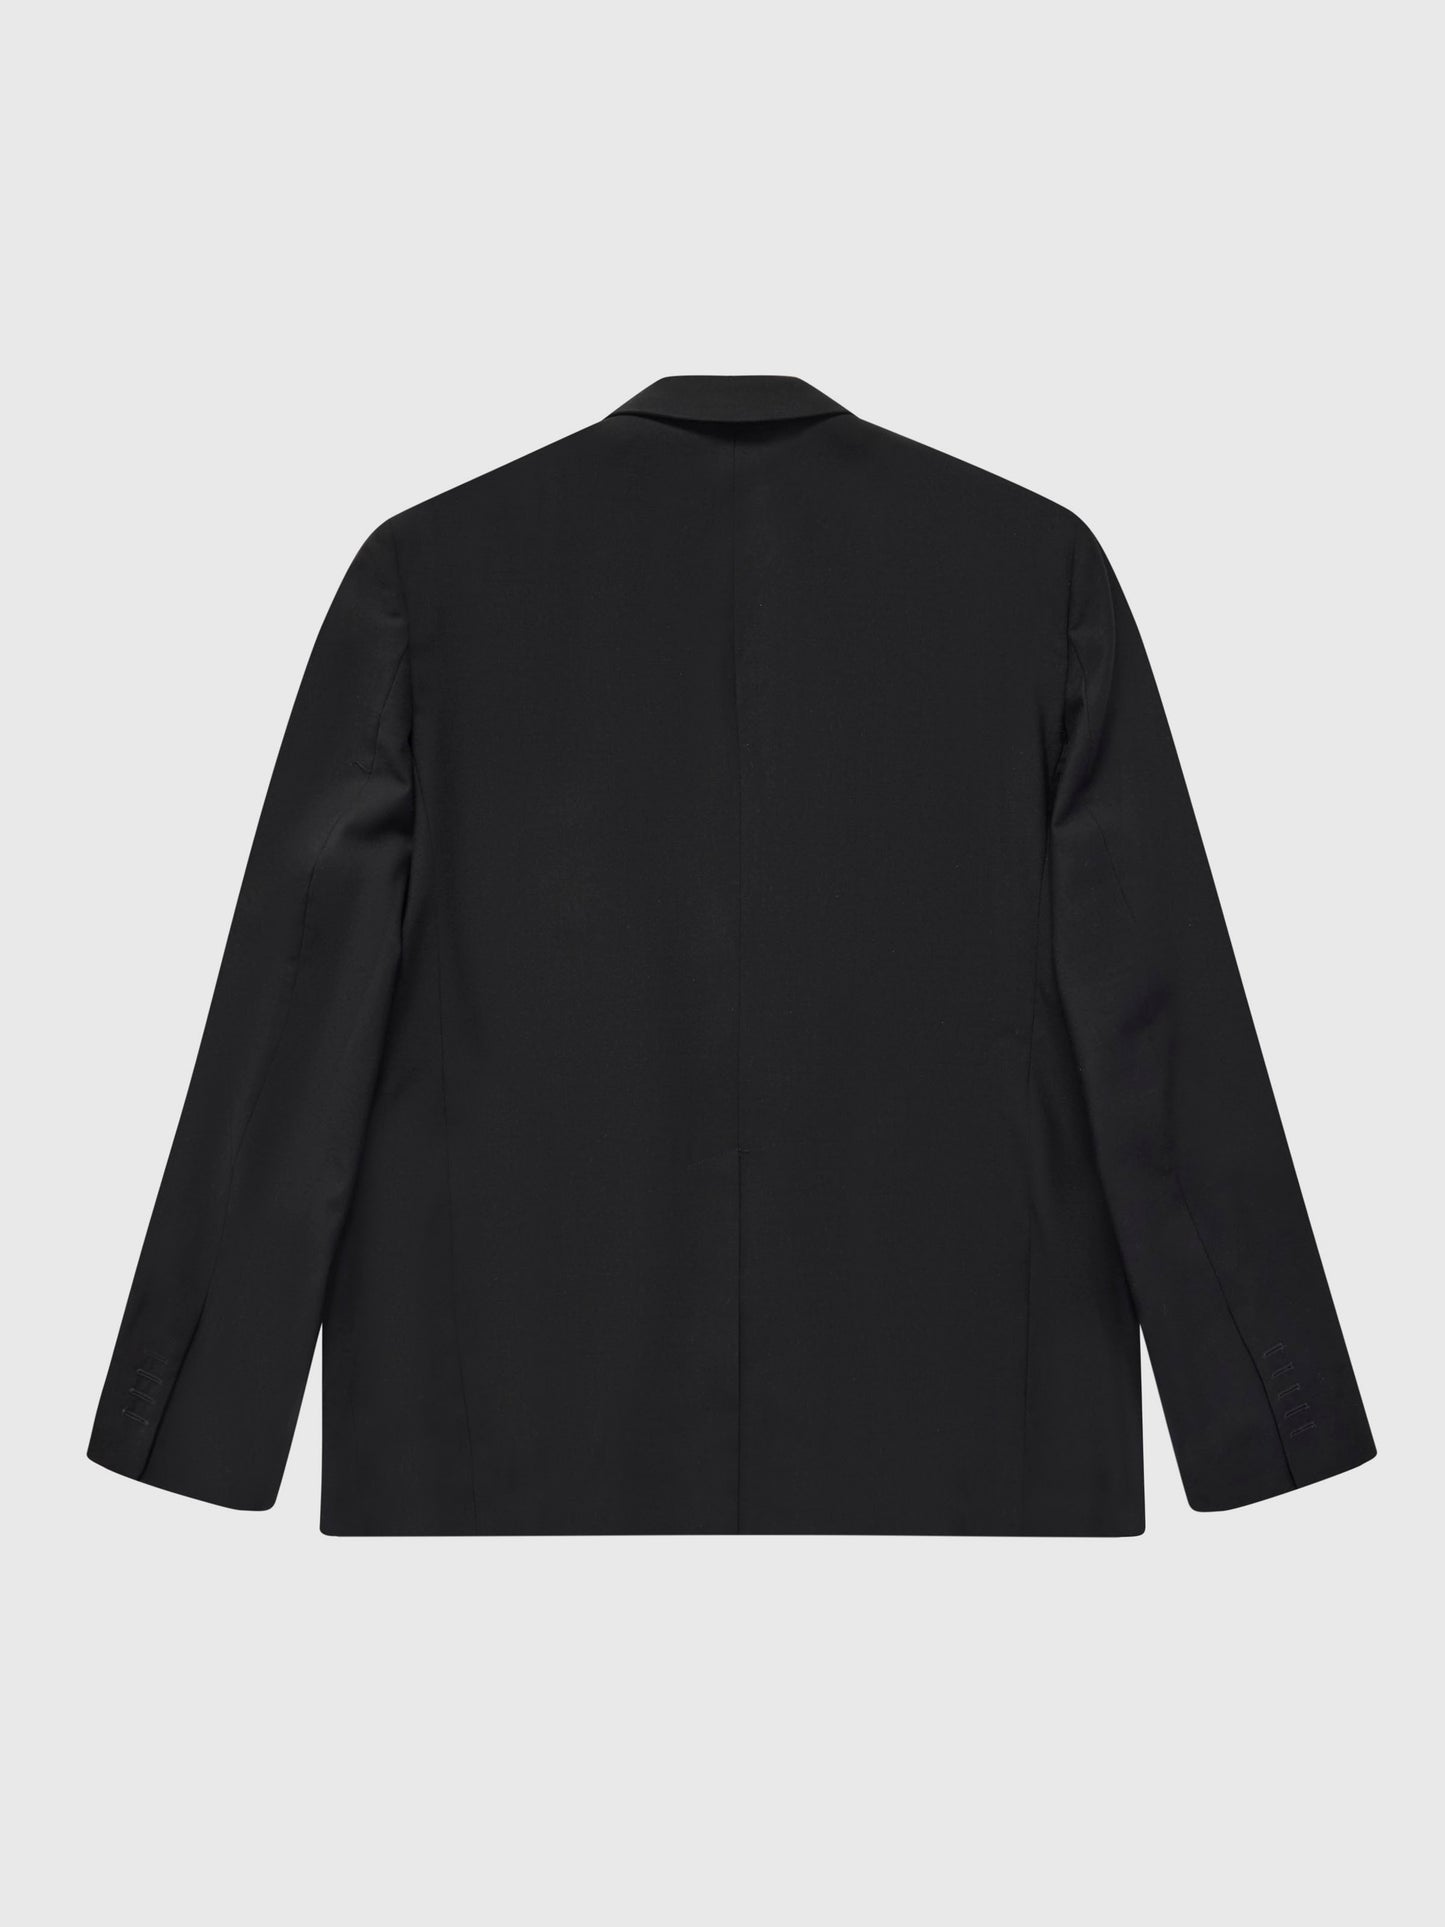 Doubled-Breasted Jacket in Black